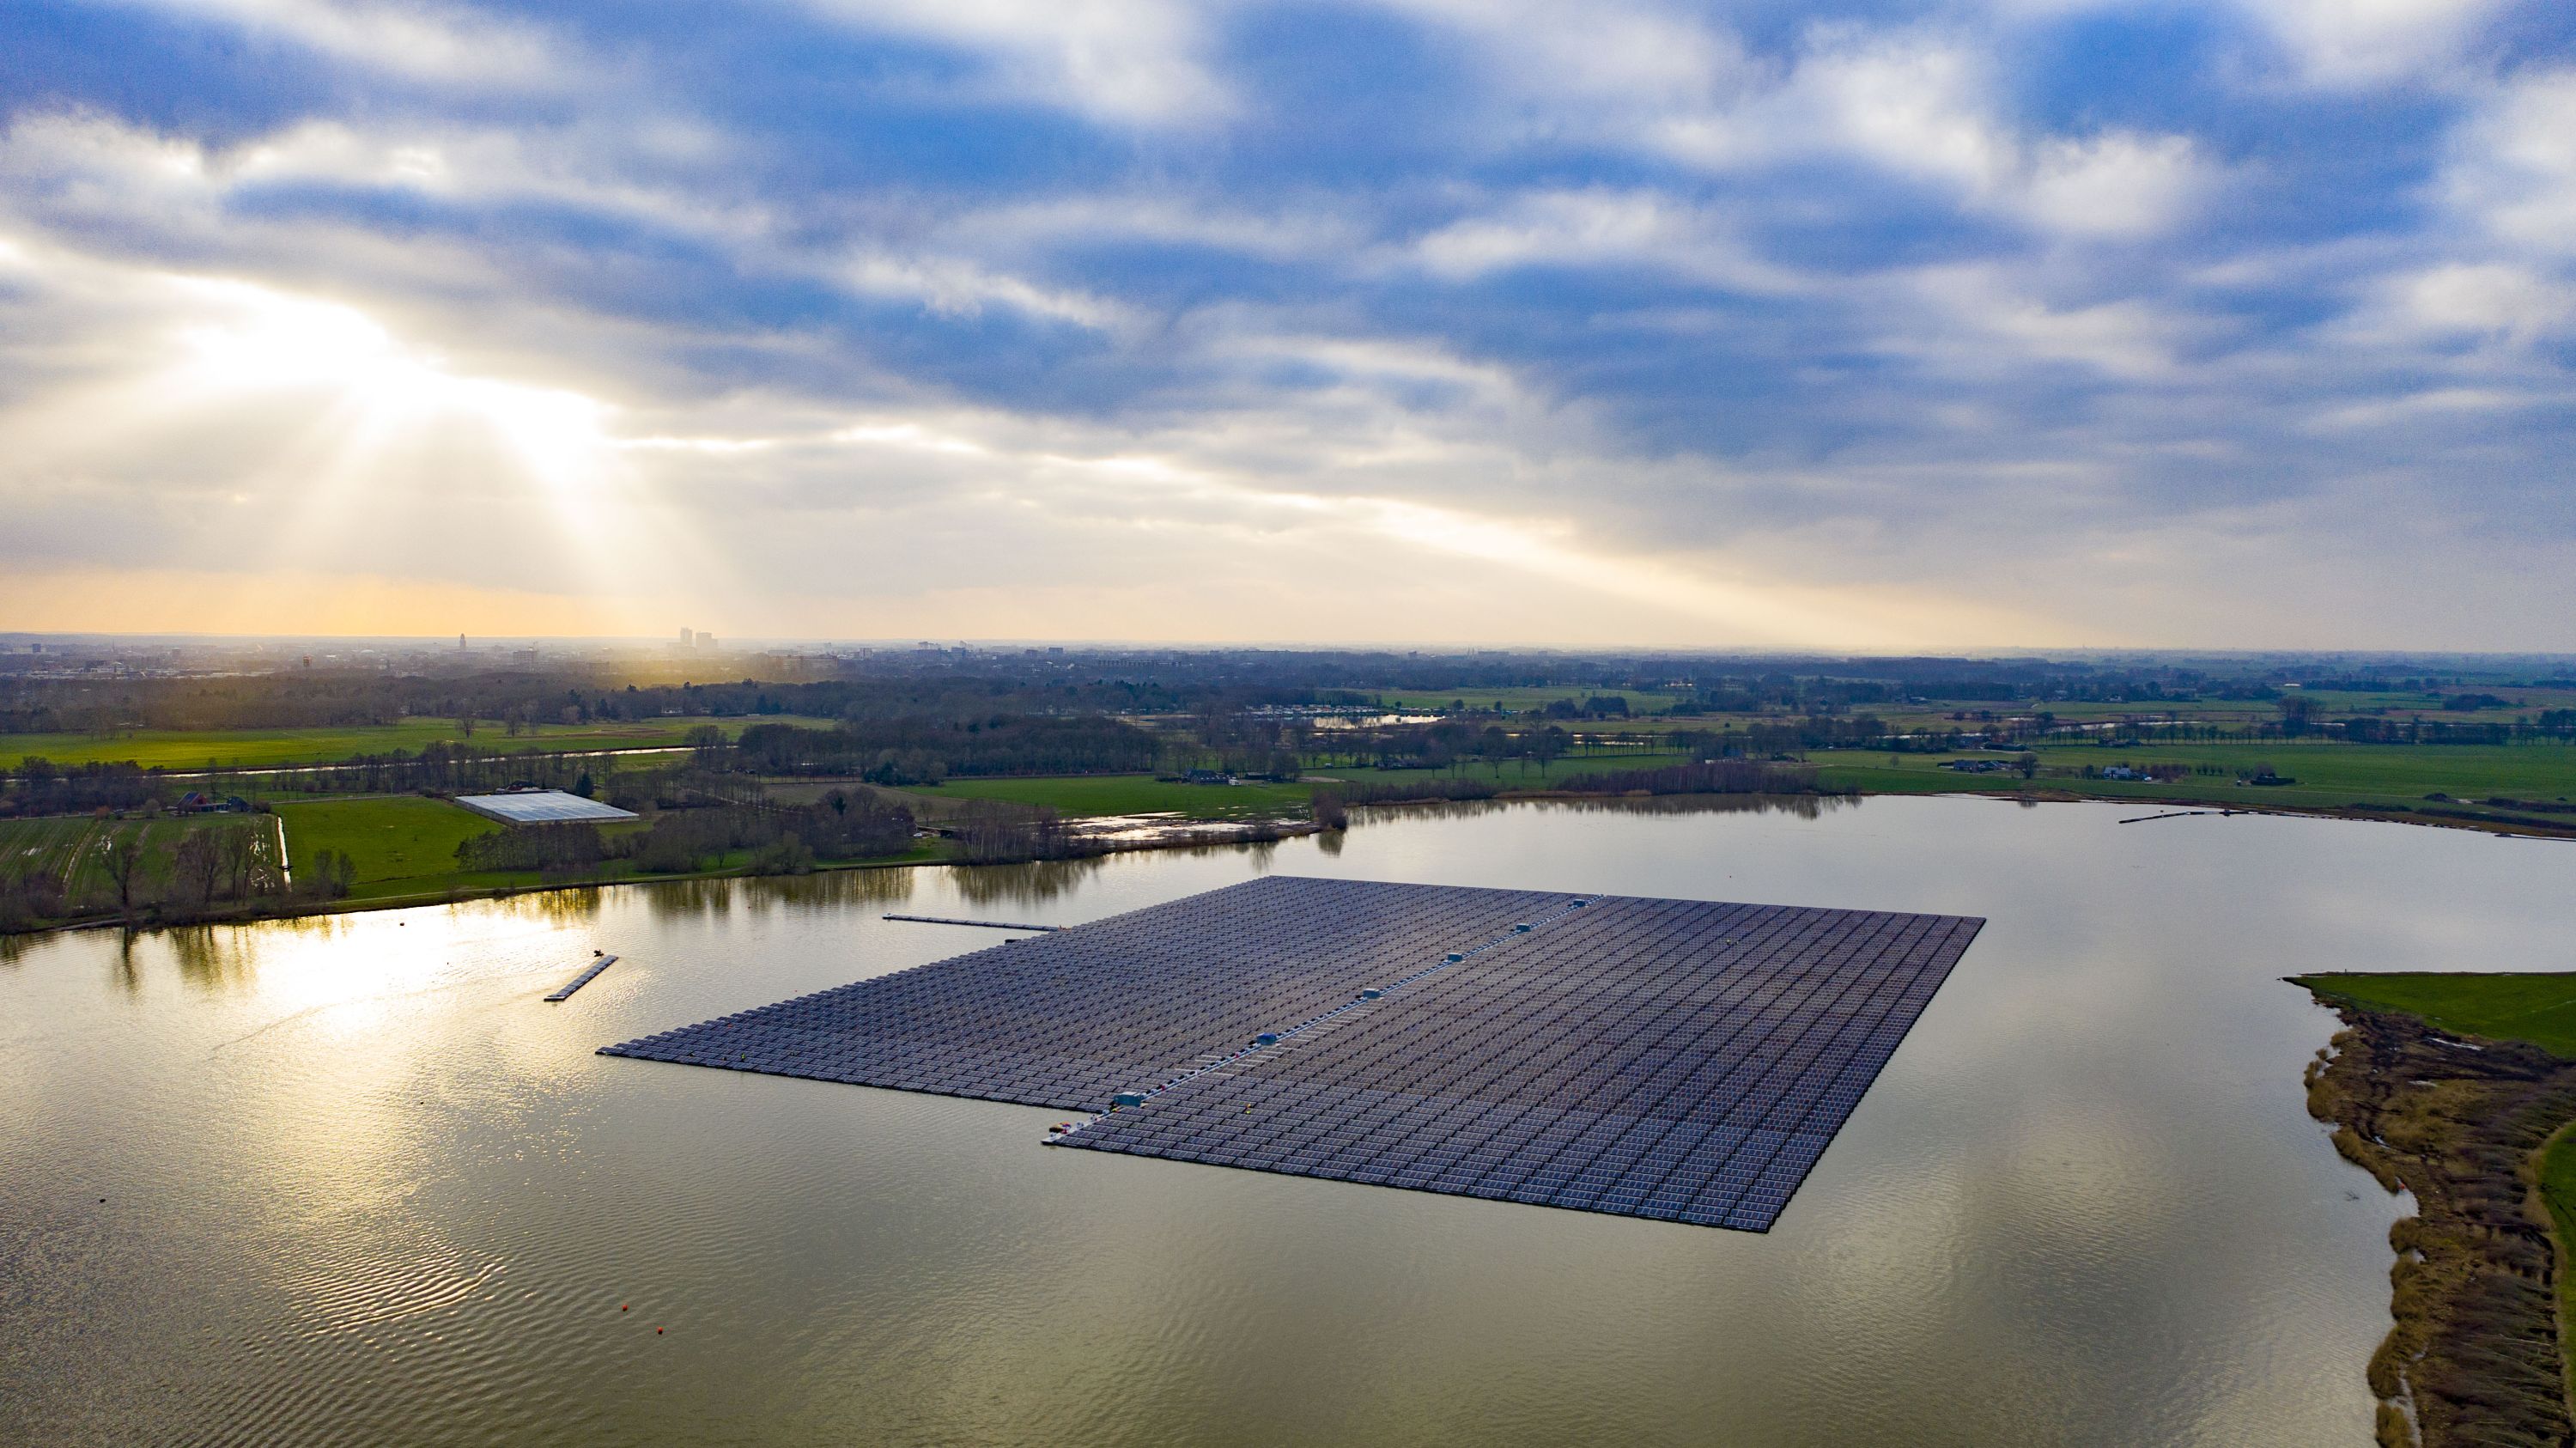 Europe’s Largest Floating Solar Farm Underway in Netherlands Bloomberg